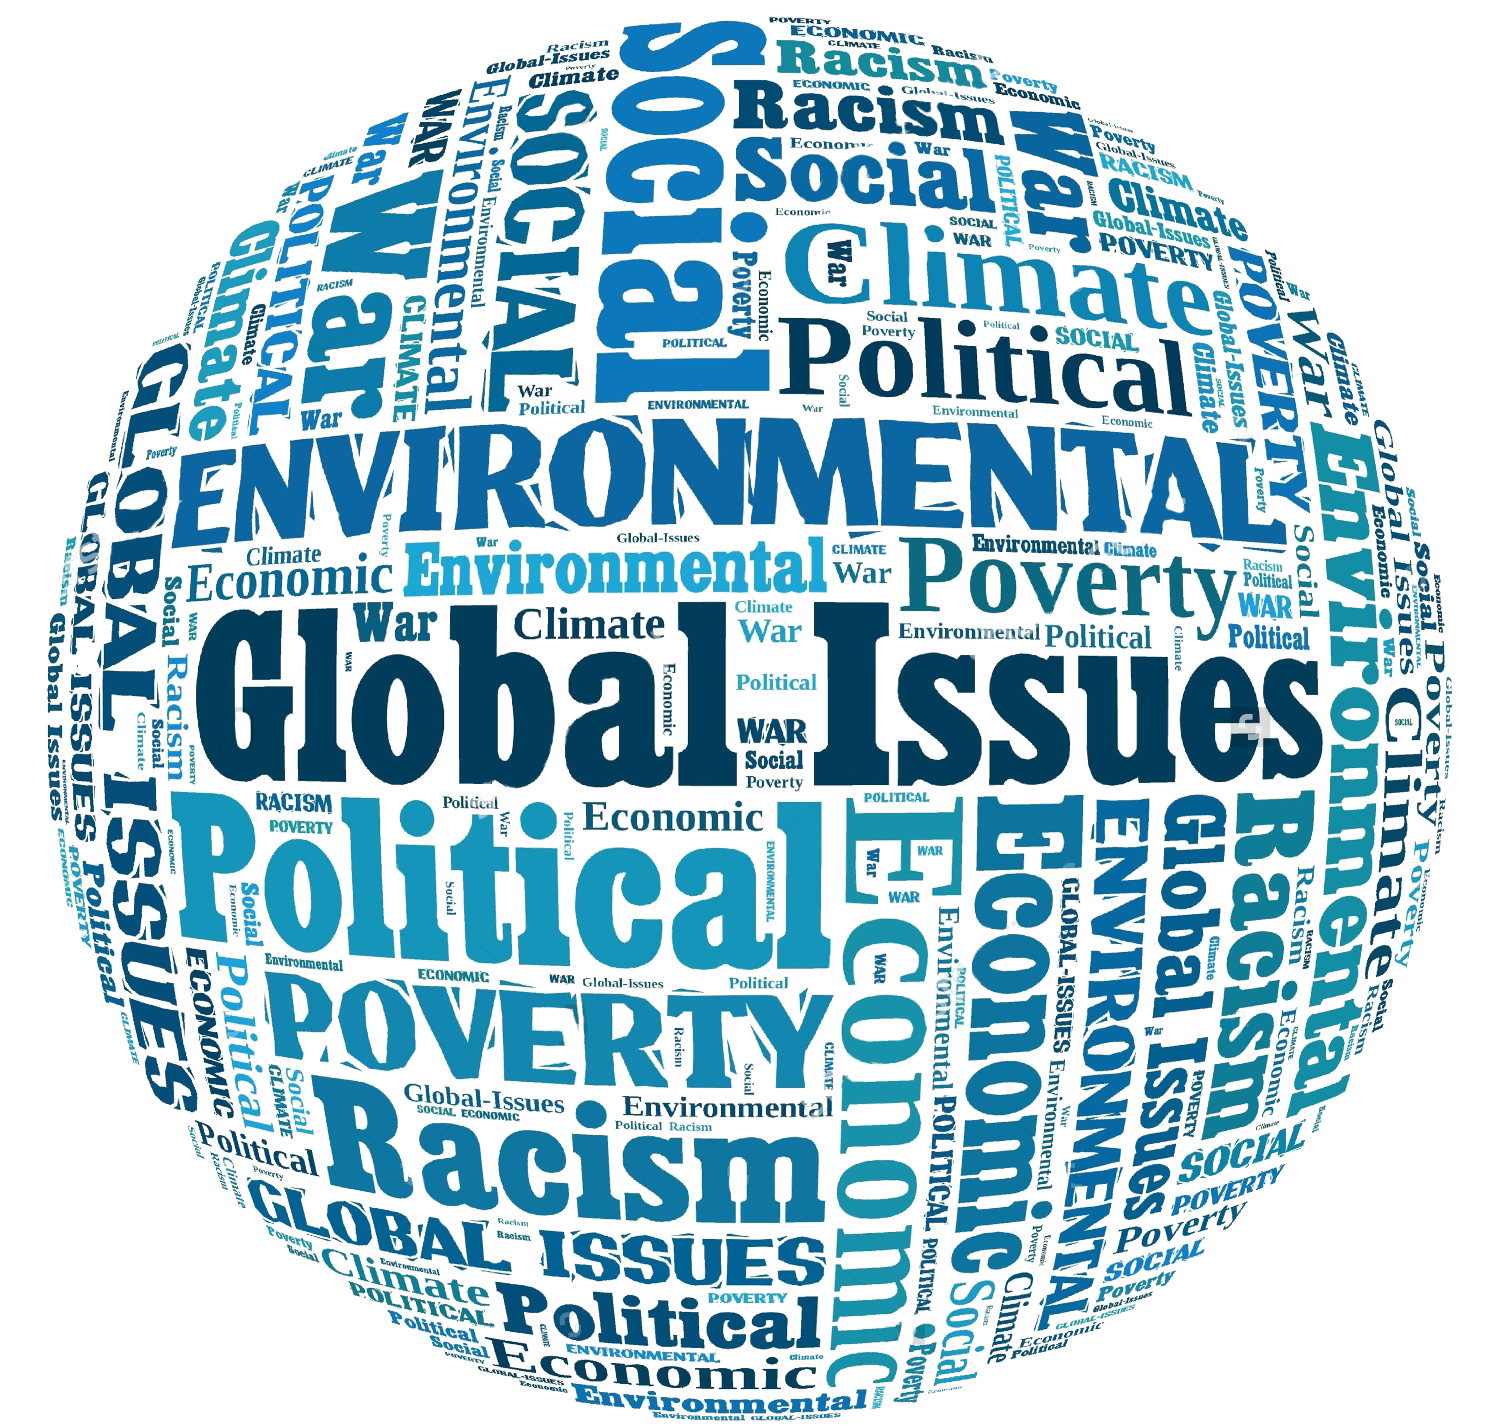 Global Issues. Глобальные проблемы на английском. Global problems of the World. Global Issues problems. Что значит issues